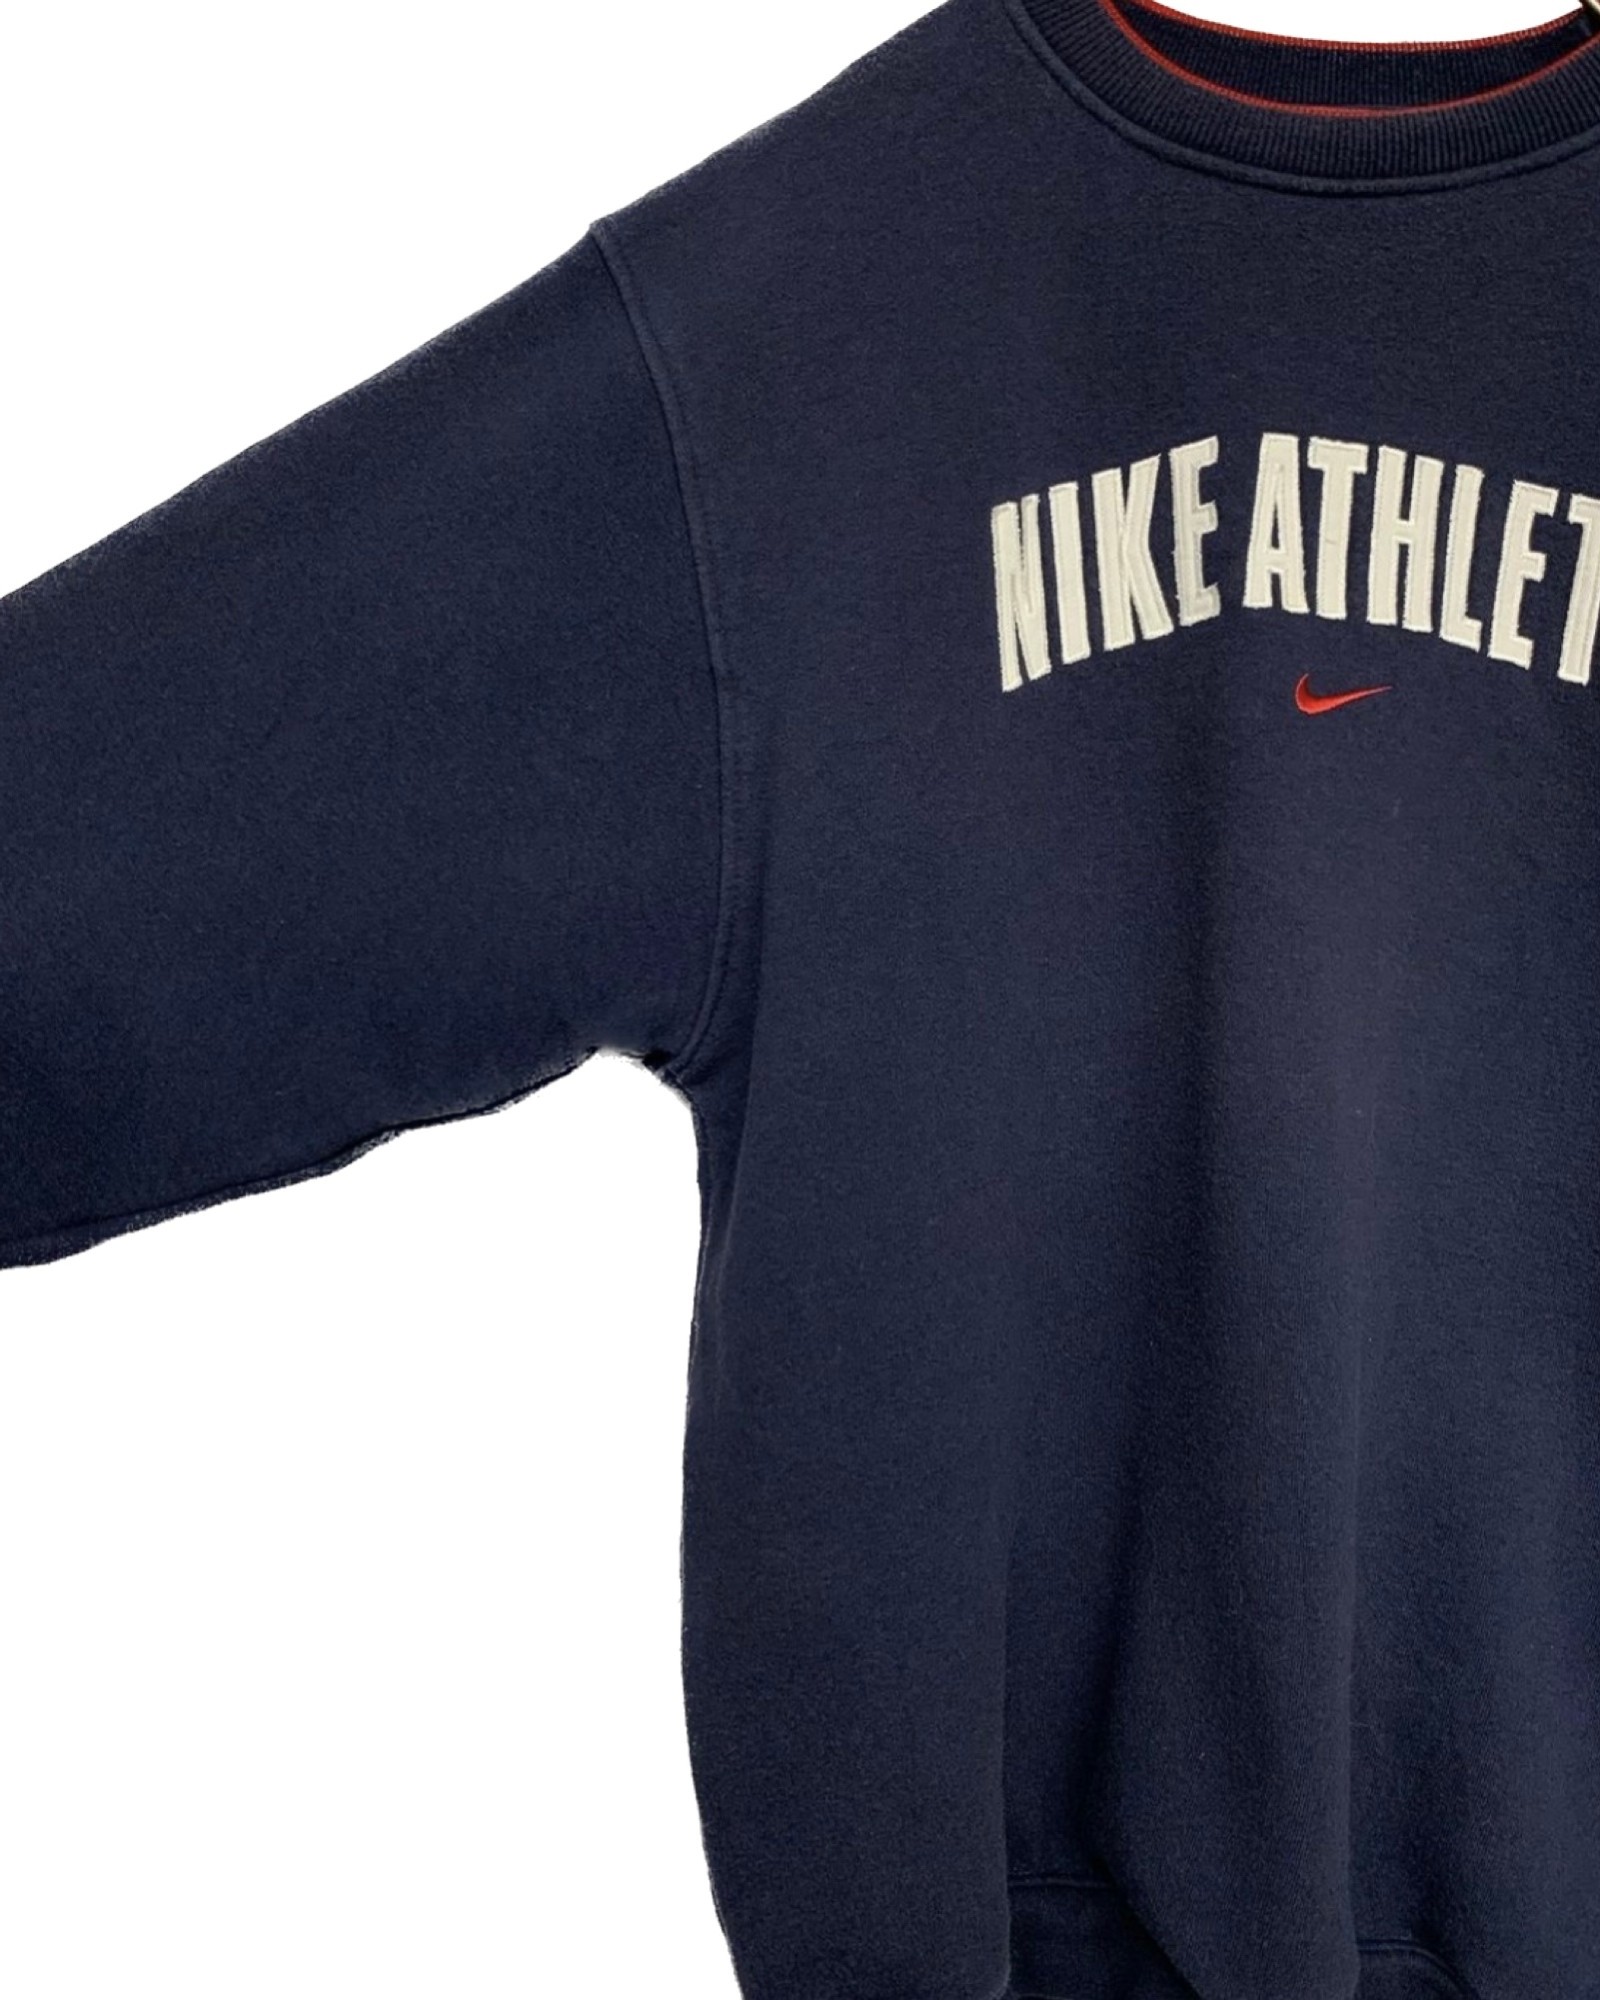 90-00’s “NIKE” Embroidered Sweat Shirt